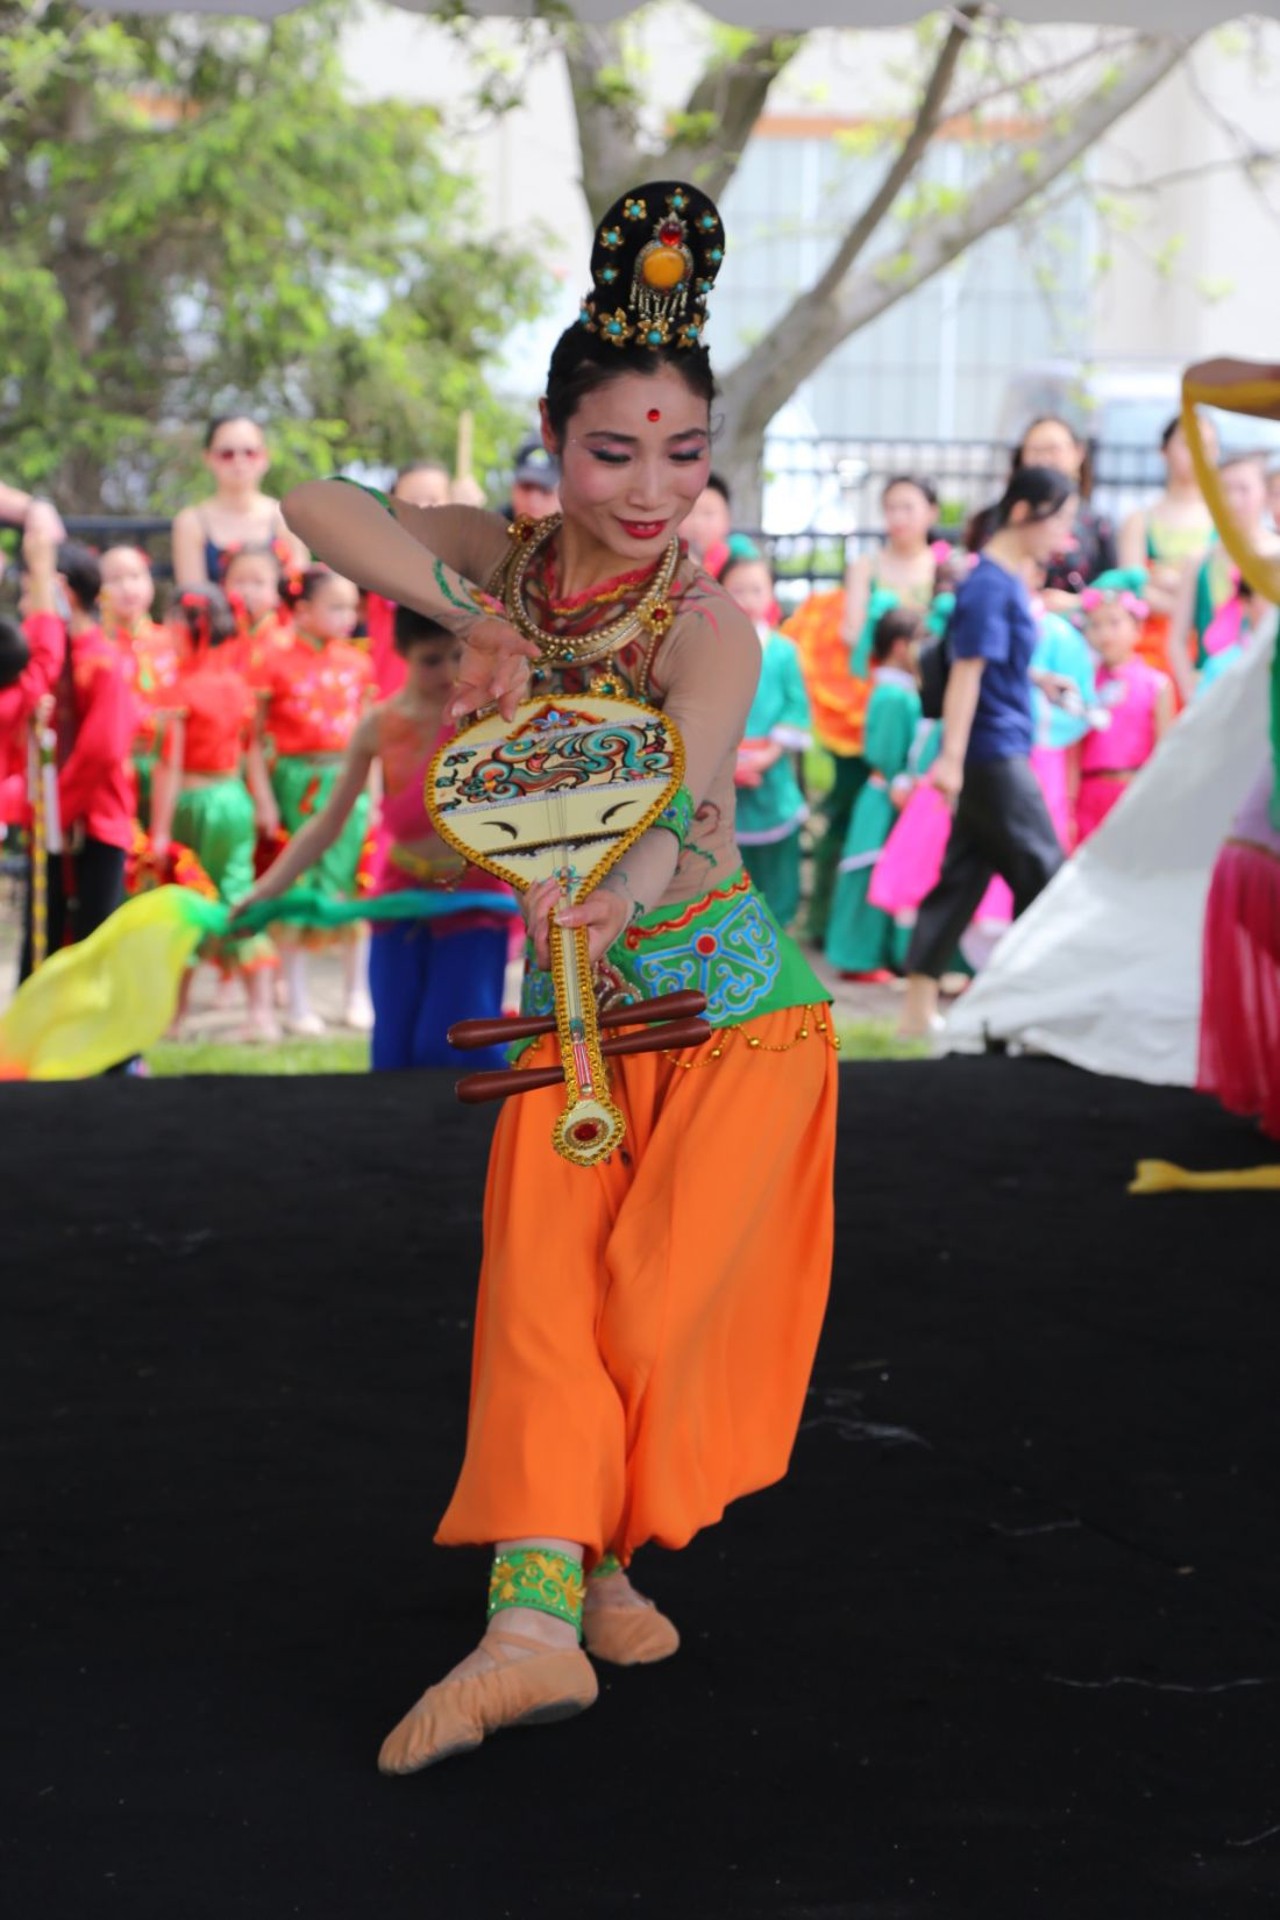 The Best Moments From the 2019 Cleveland Asian Festival